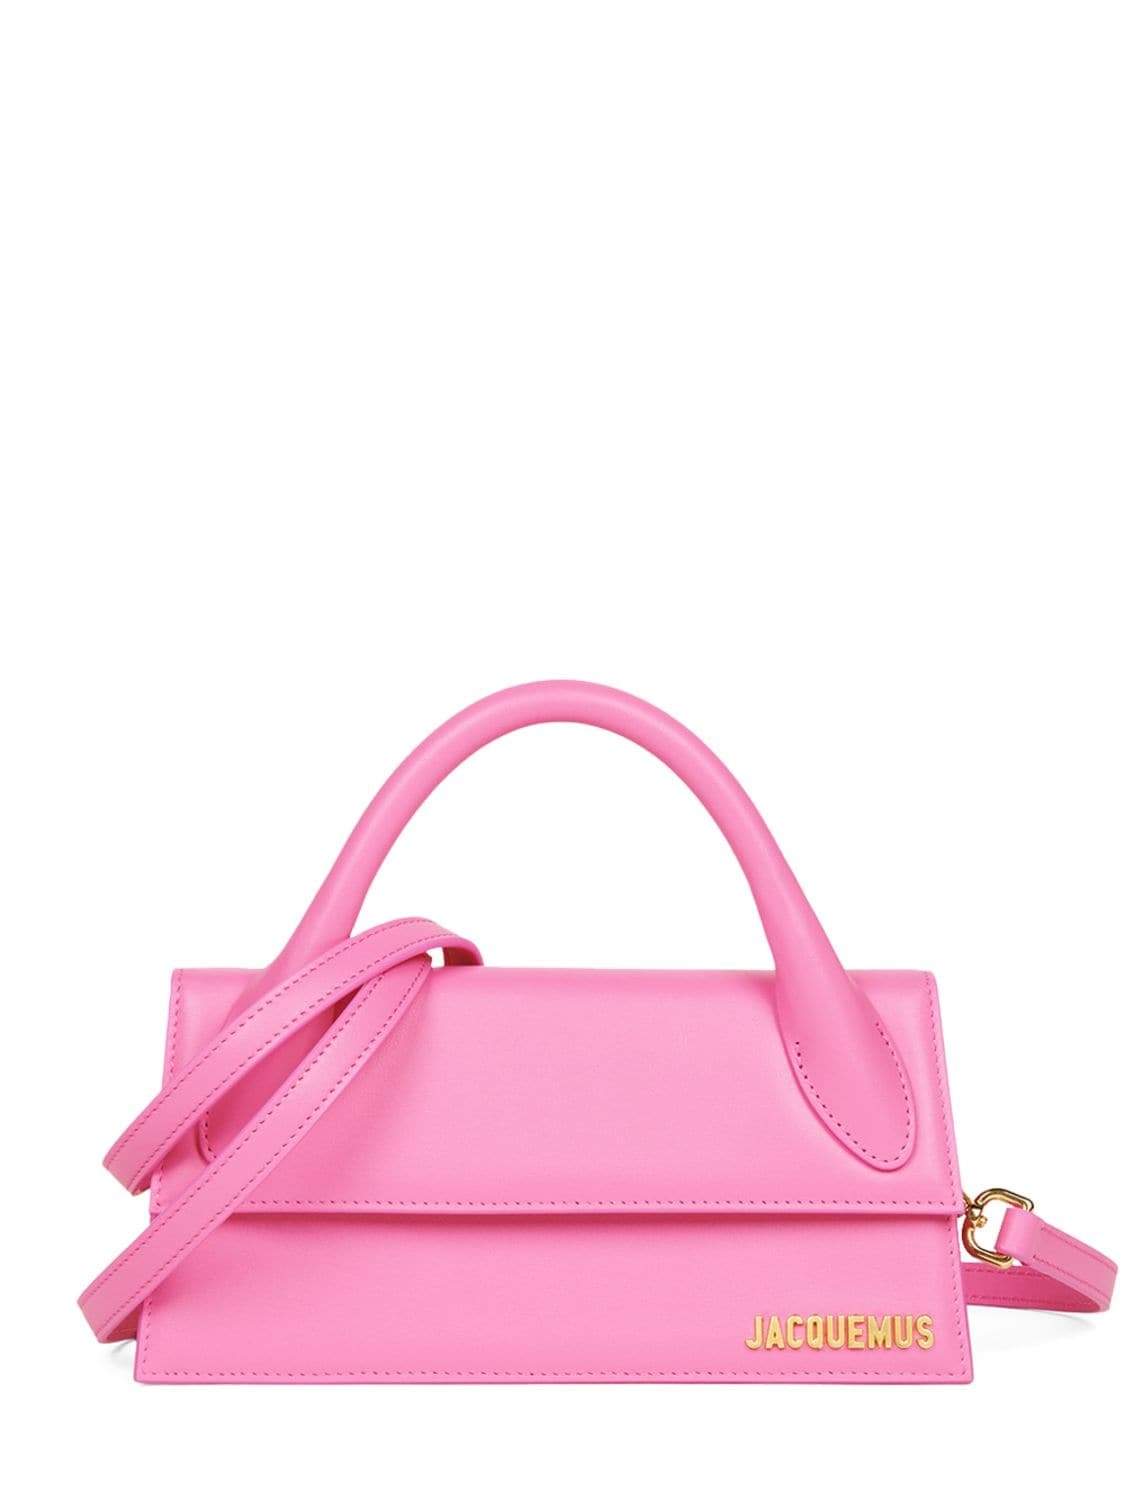 JACQUEMUS Le Chiquito Long Leather Top Handle Bag in pink